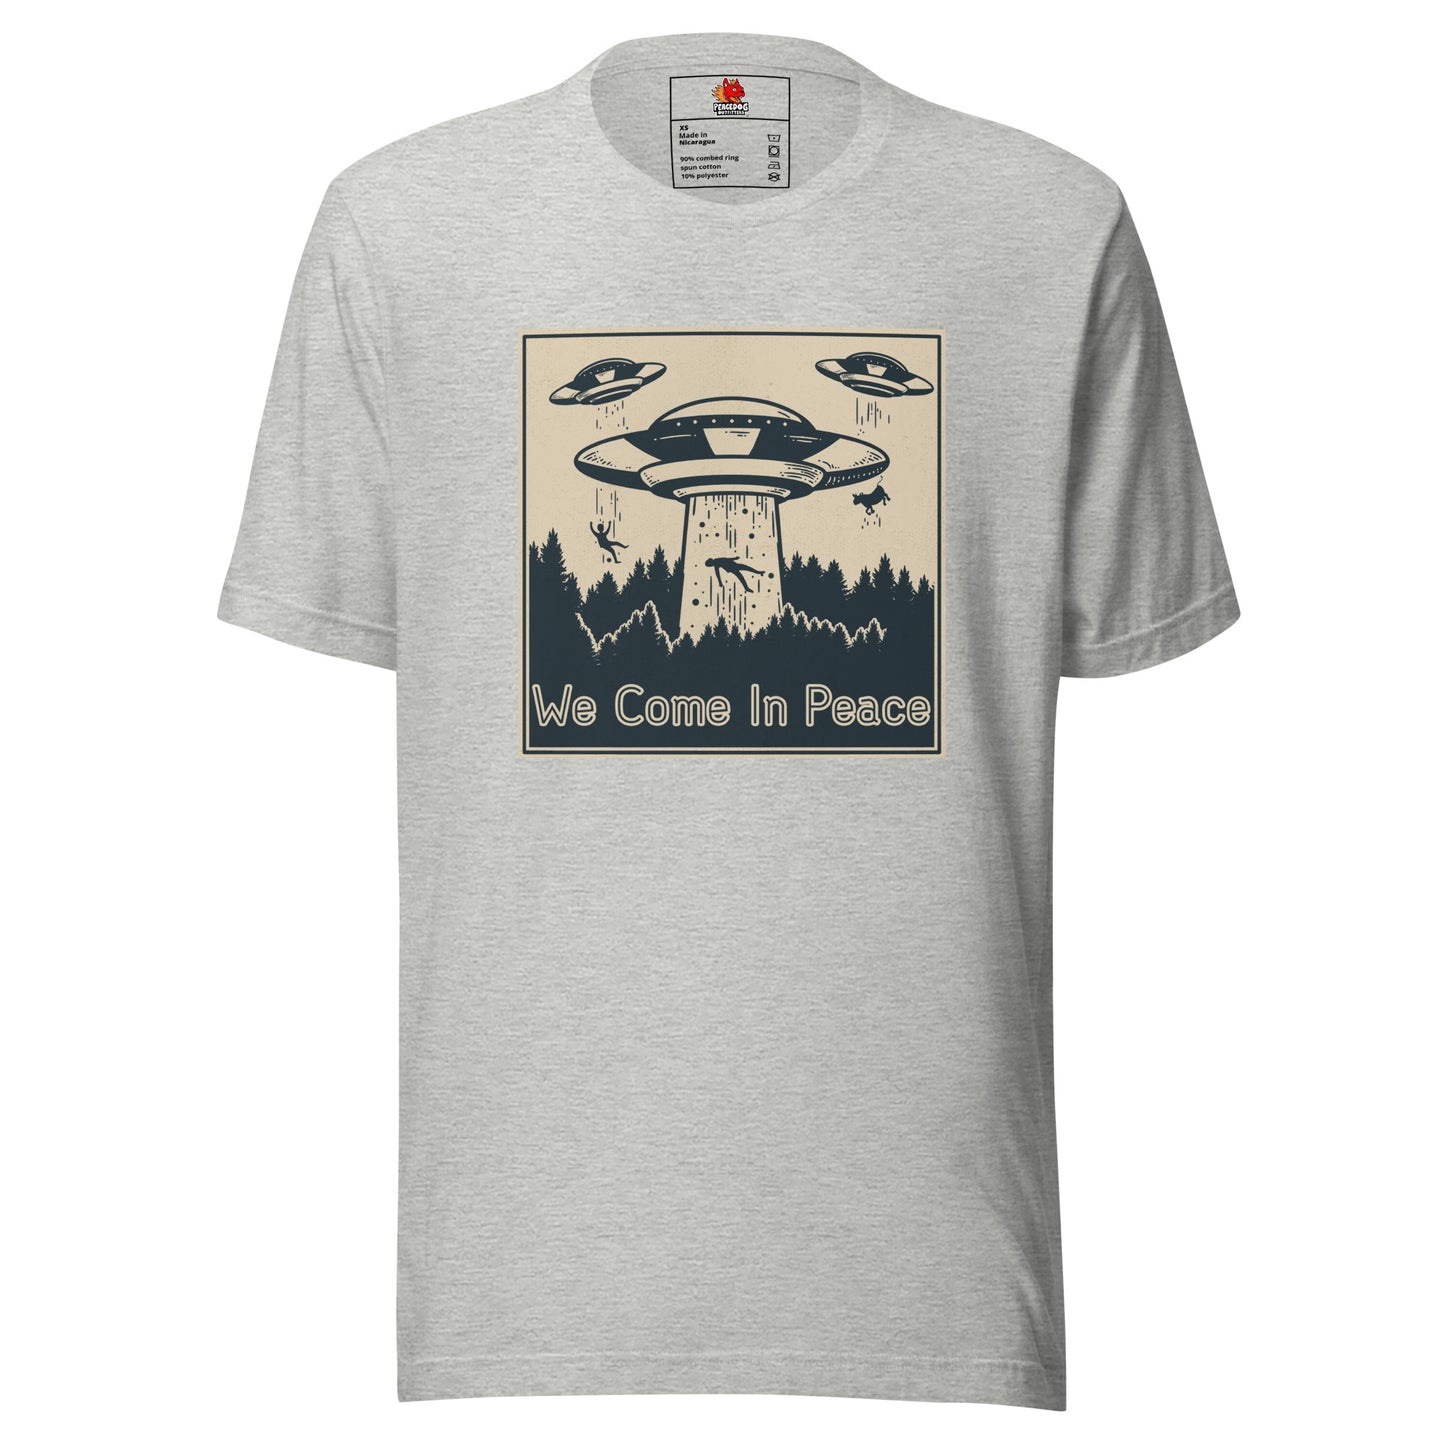 We Come in Peace T-shirt